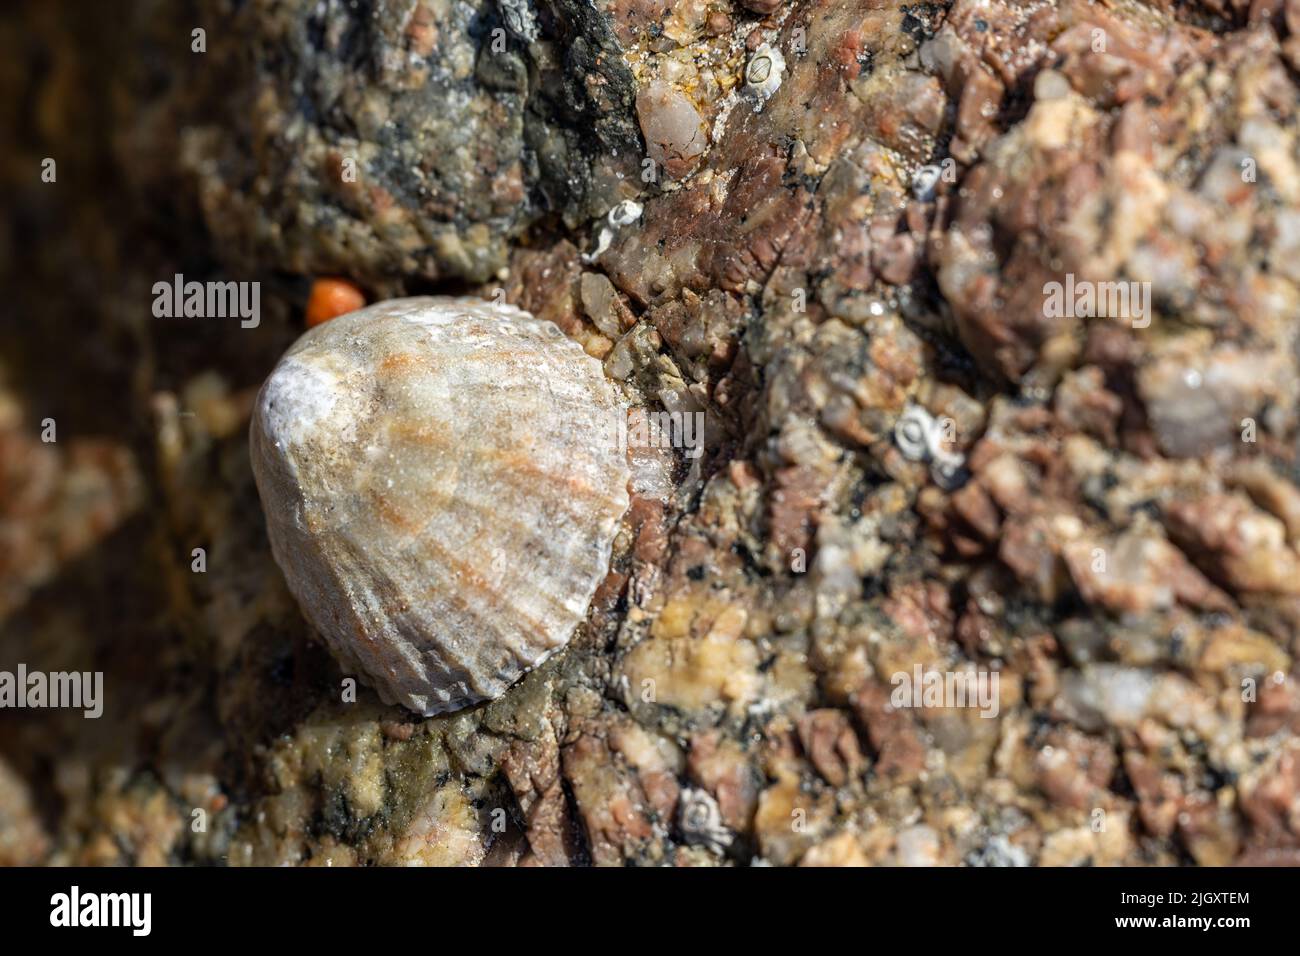 Limpets. An aquatric sea snails stuck to a rock on the UK coastline at low tide. Stock Photo